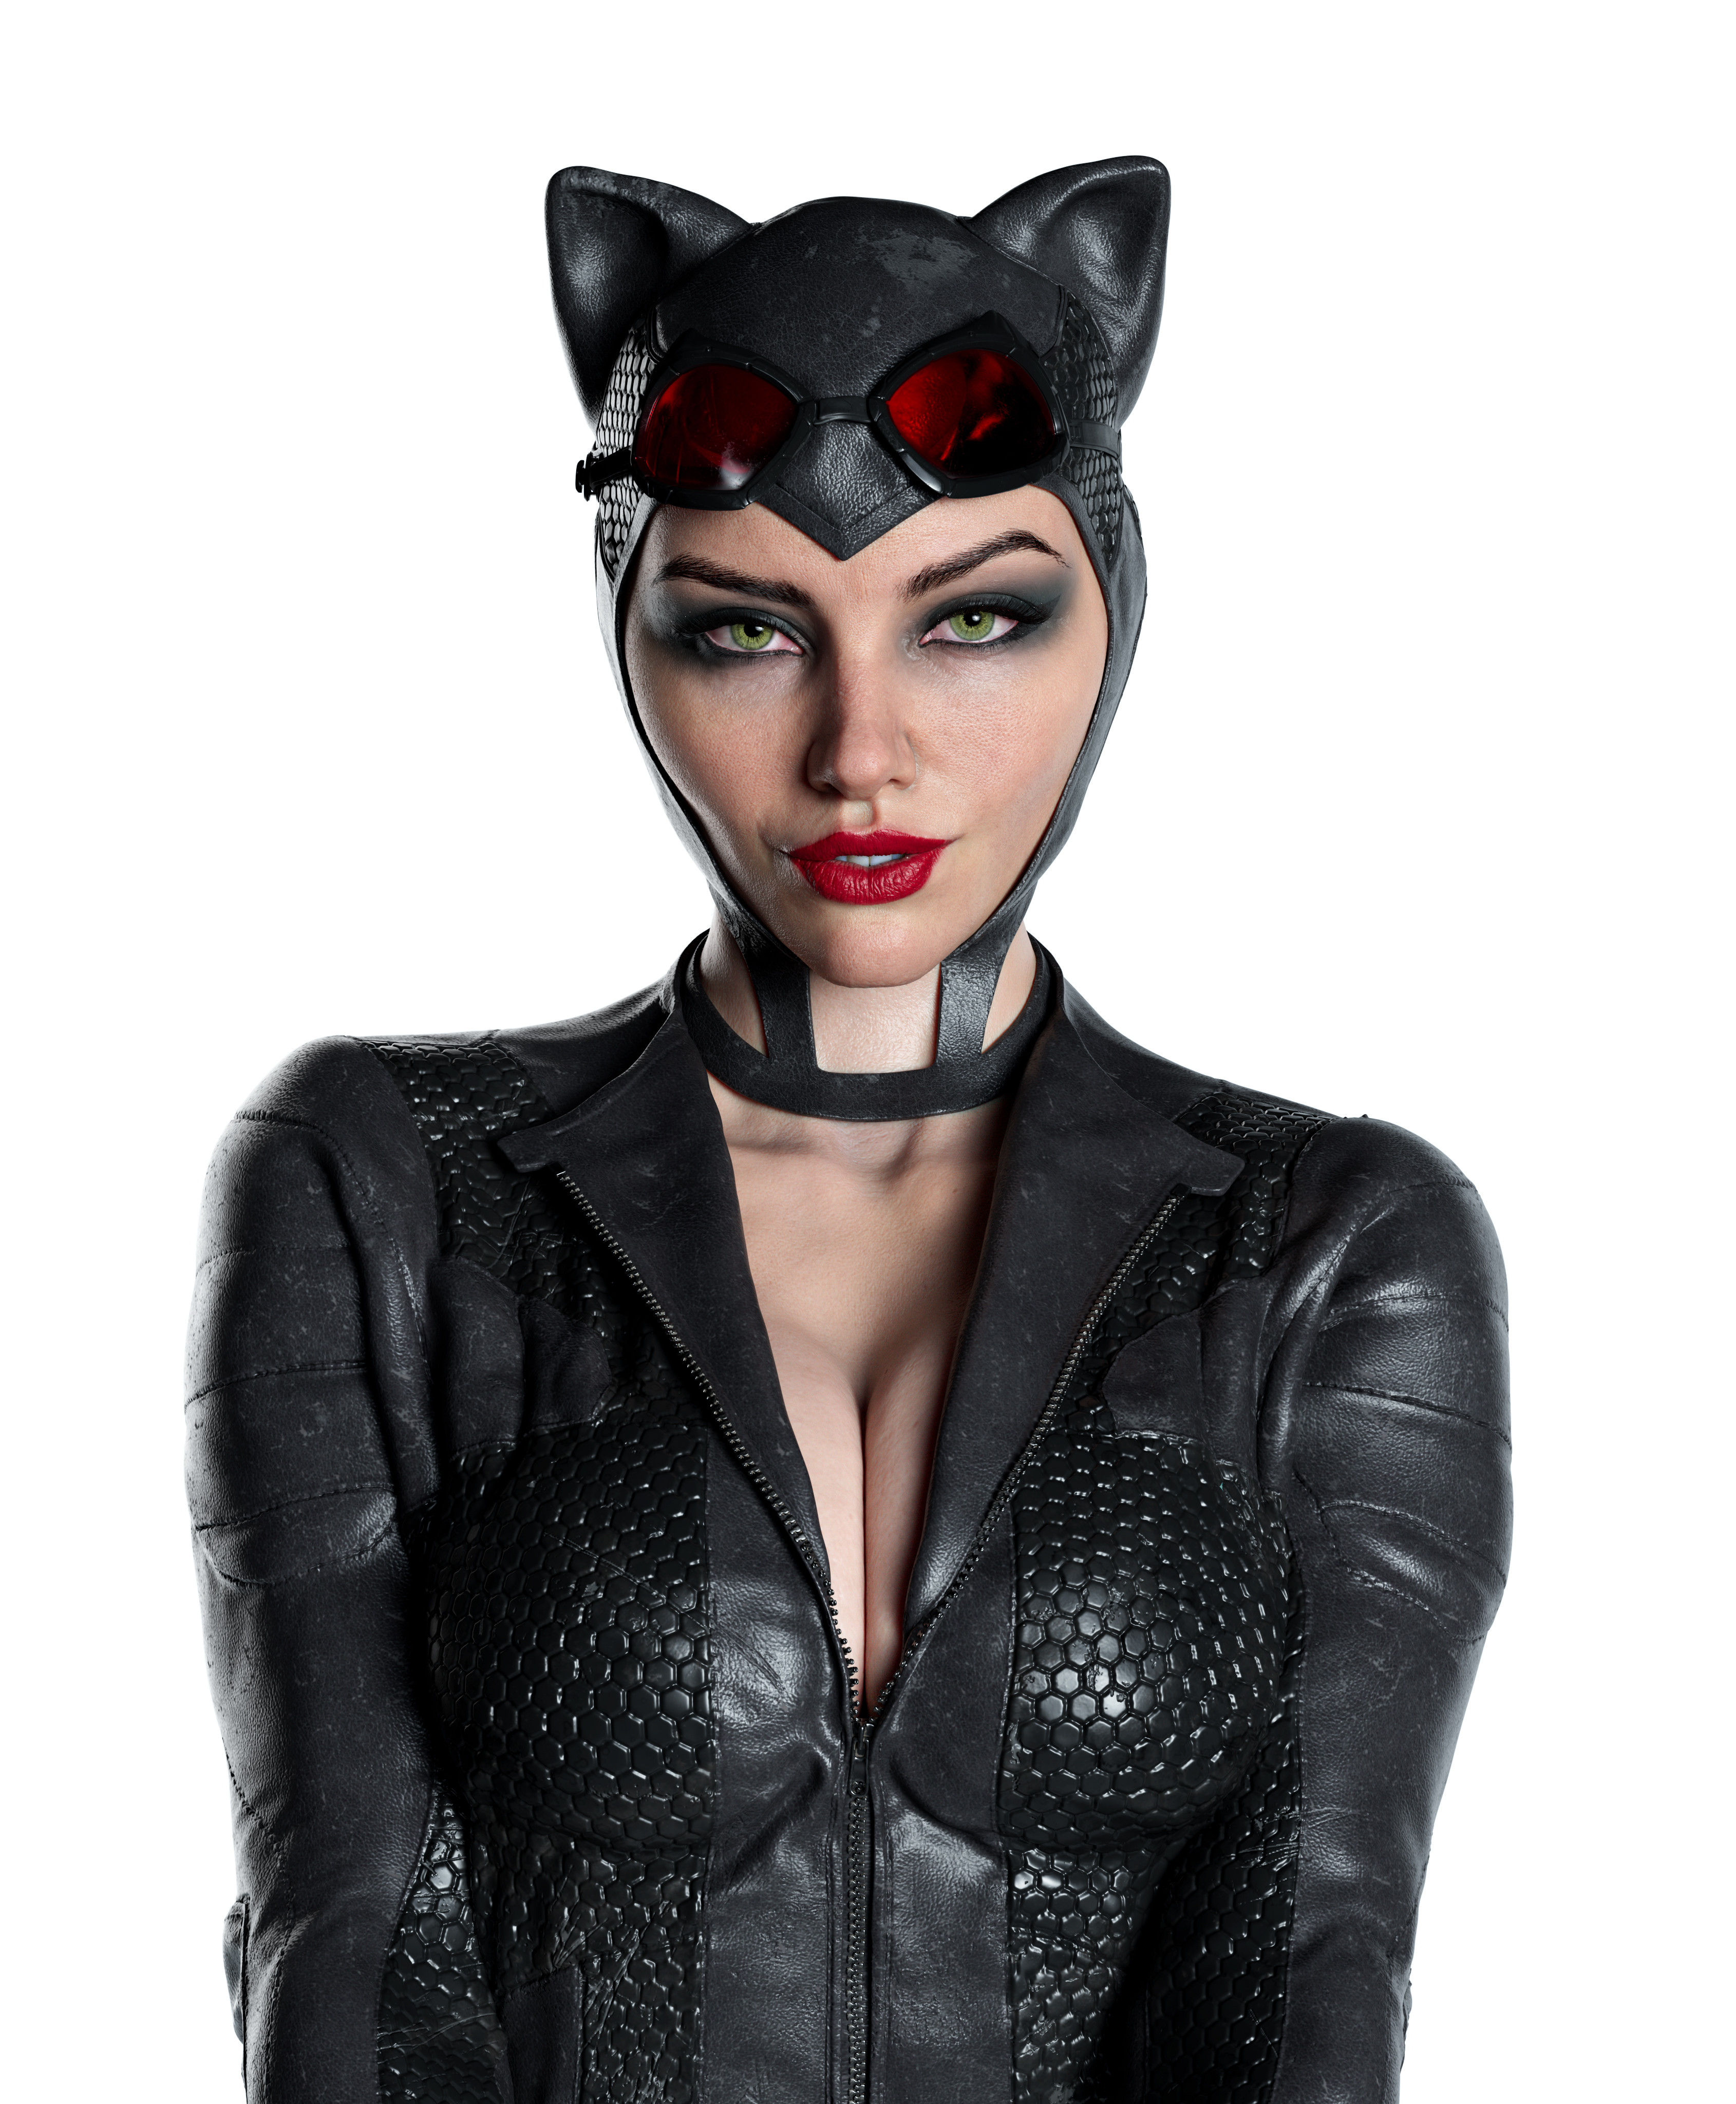 Artwork Digital Art Women Catwoman Mask Red Lipstick Looking At Viewer White Background Simple Backg 3380x4096